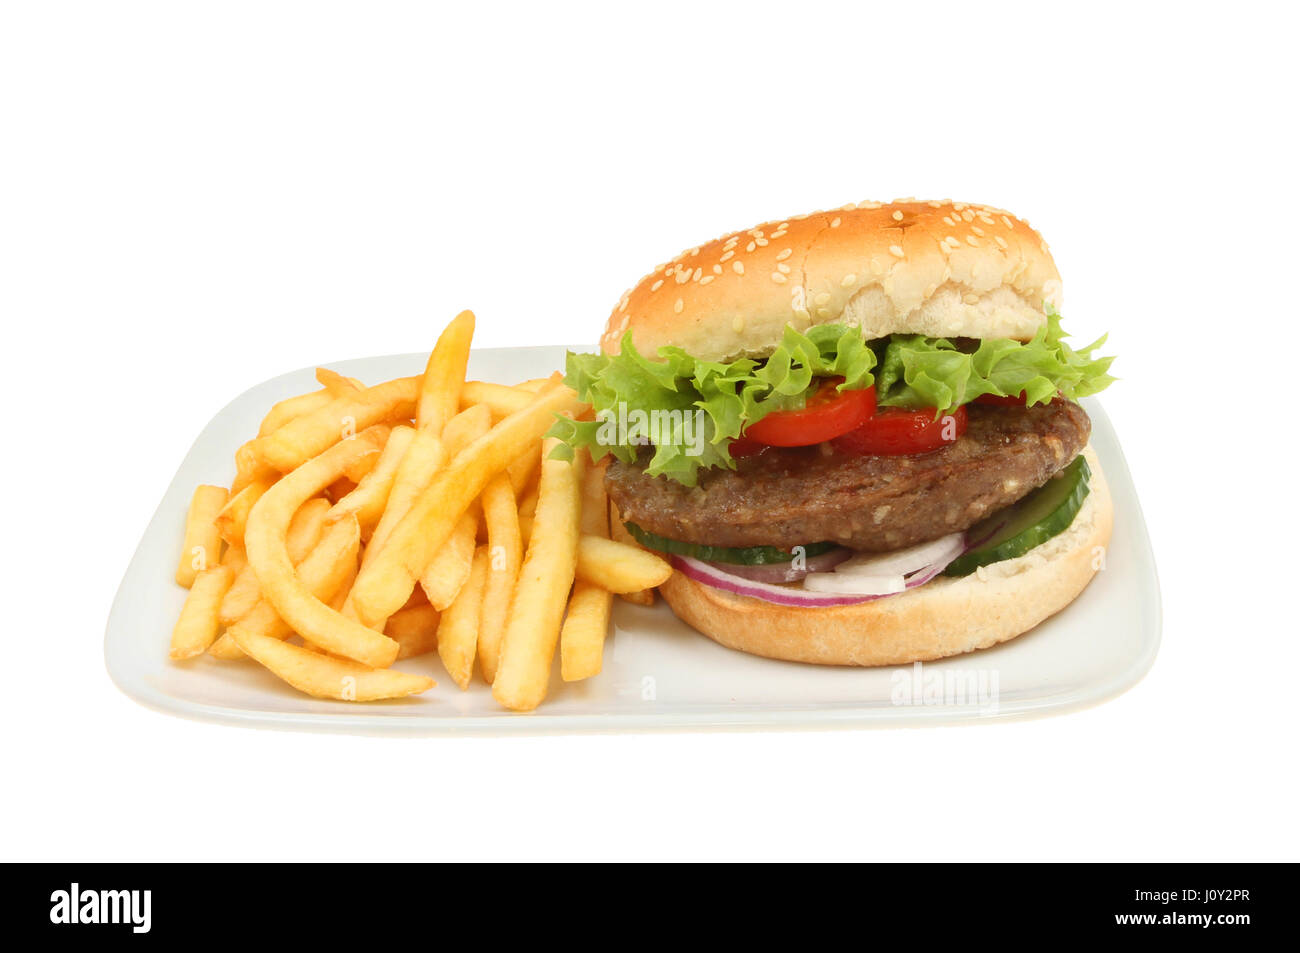 Beefburger in a bun with French fries on a plate isolated against white Stock Photo